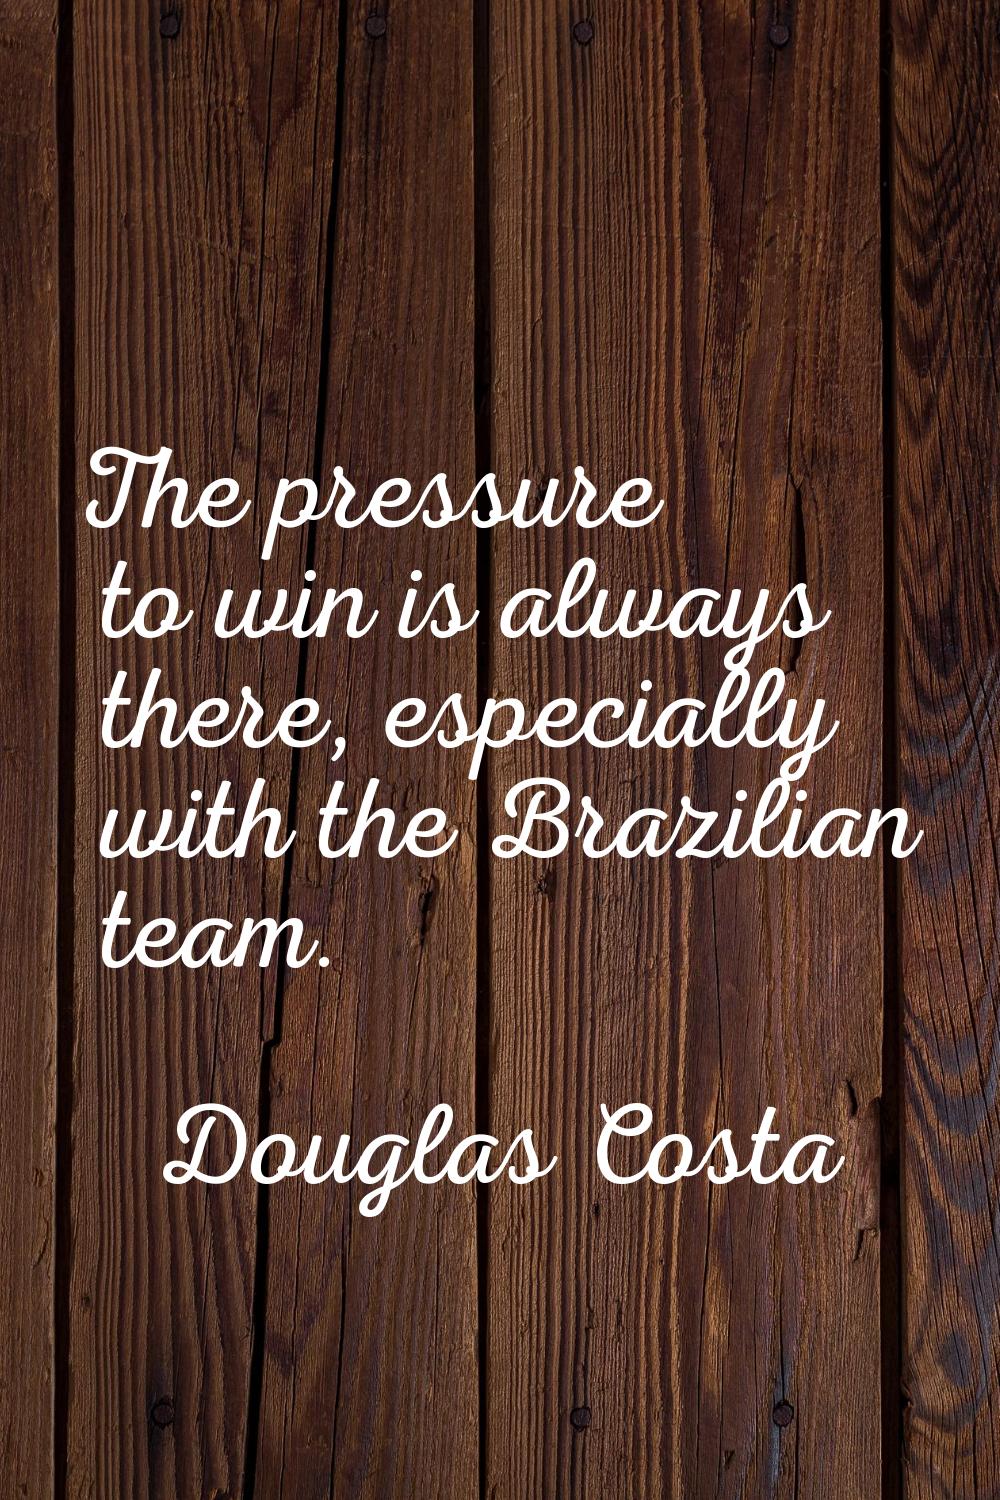 The pressure to win is always there, especially with the Brazilian team.